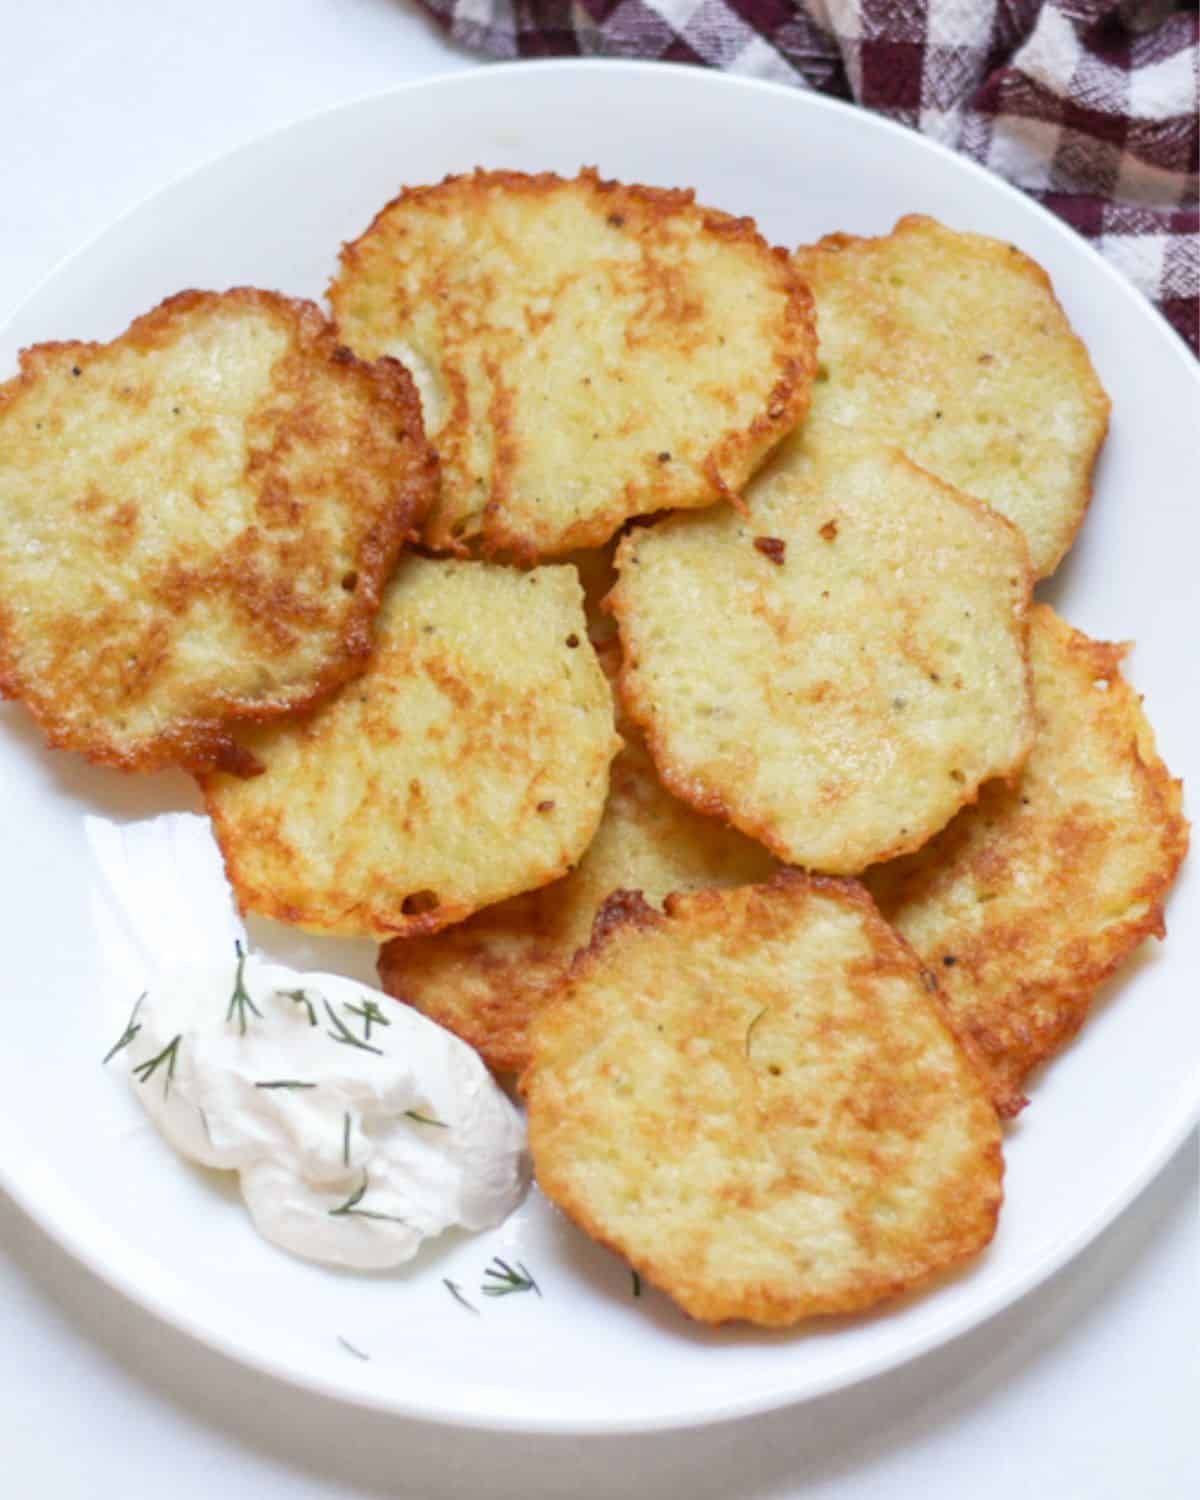 Deruny potato pancakes on a white place served with a dollop of sour cream.